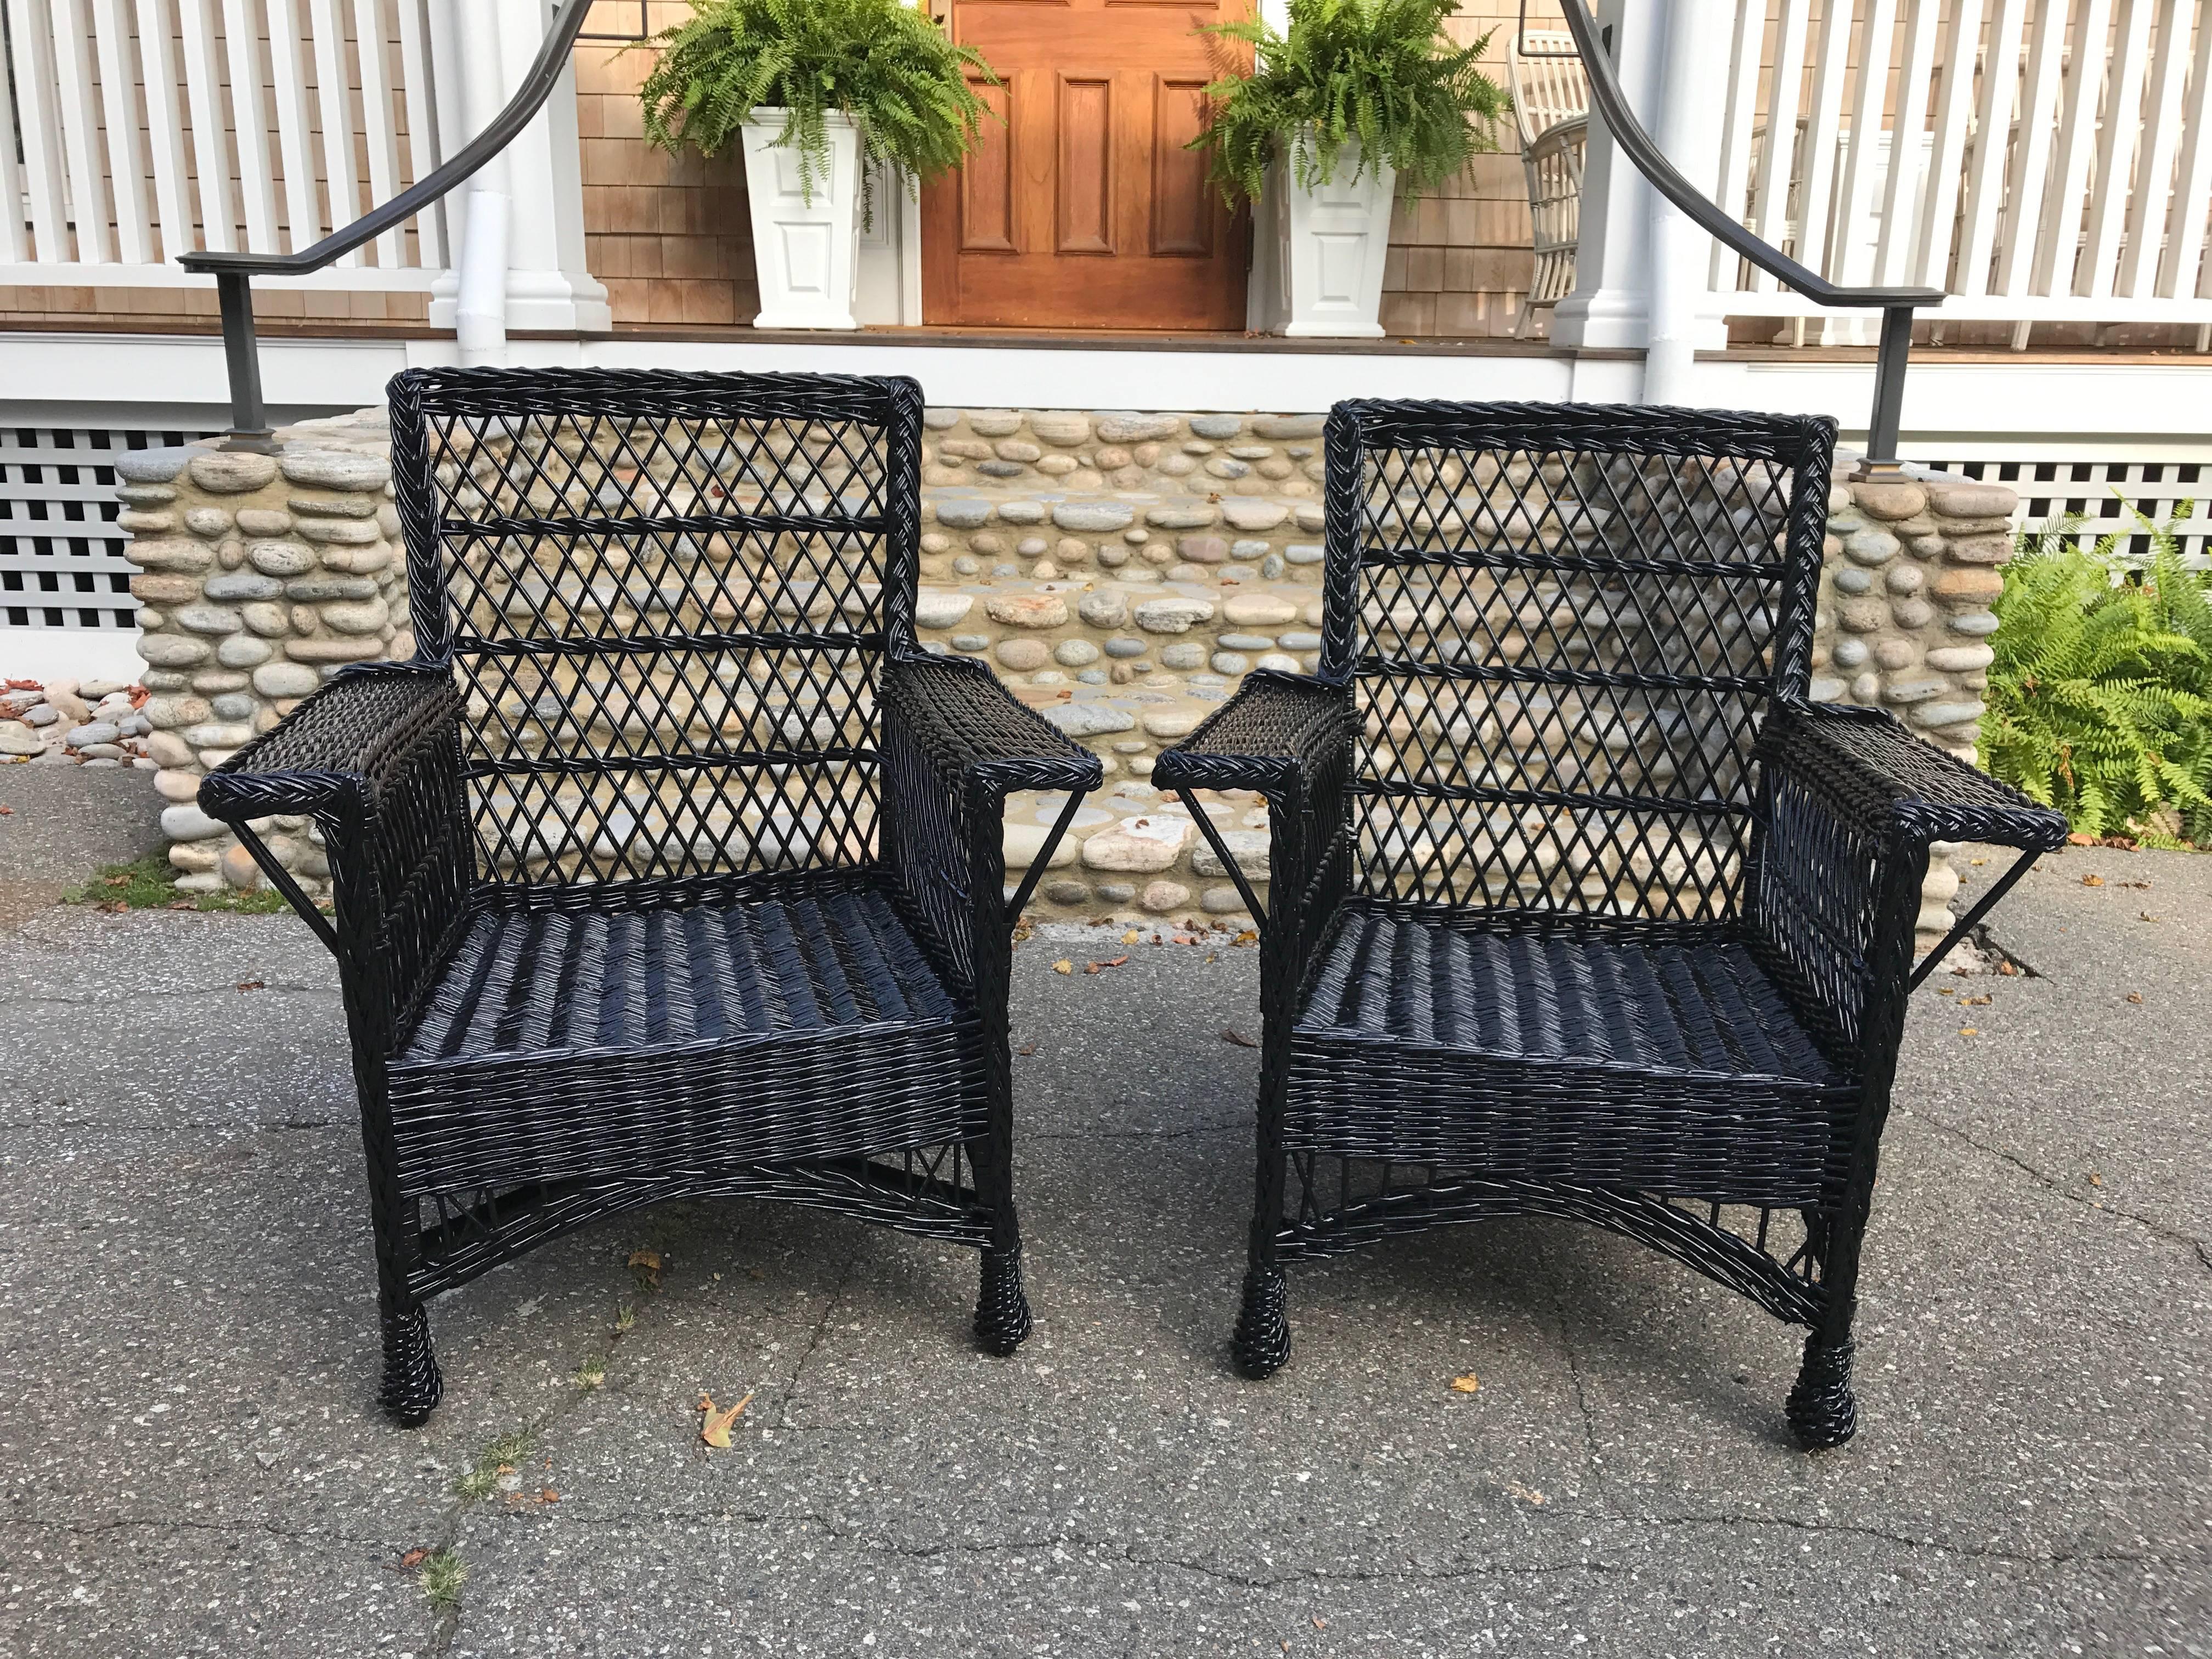 One pair of antique wicker chairs woven of willow in a Bar Harbor pattern and freshly painted black.